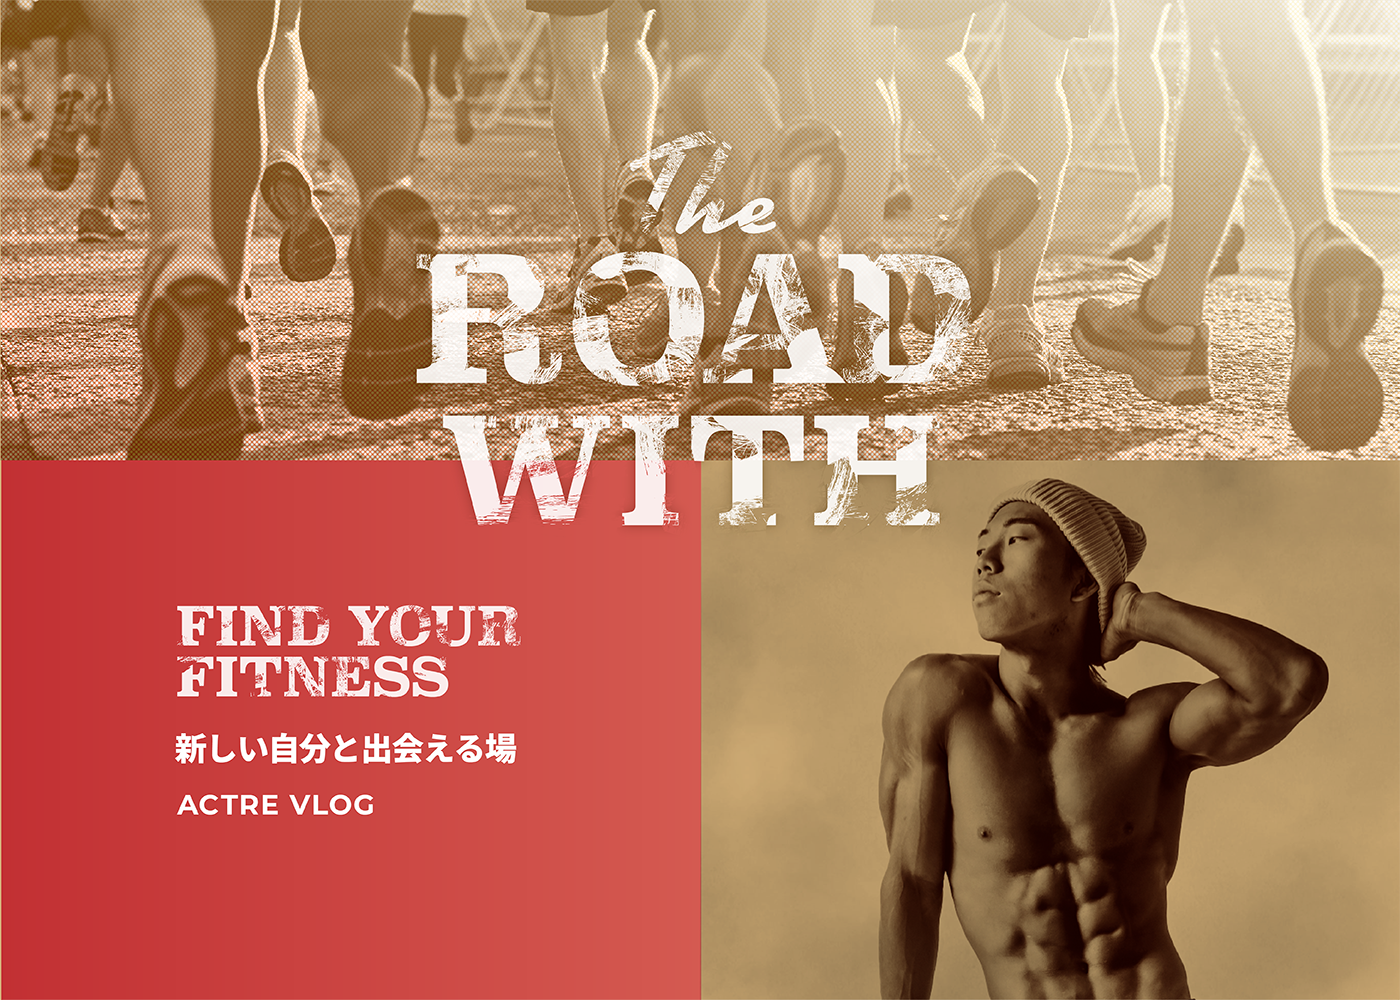 The ROAD WITH FIND YOUR FITNESS 新しい自分と出会える場 ACTRE VLOG